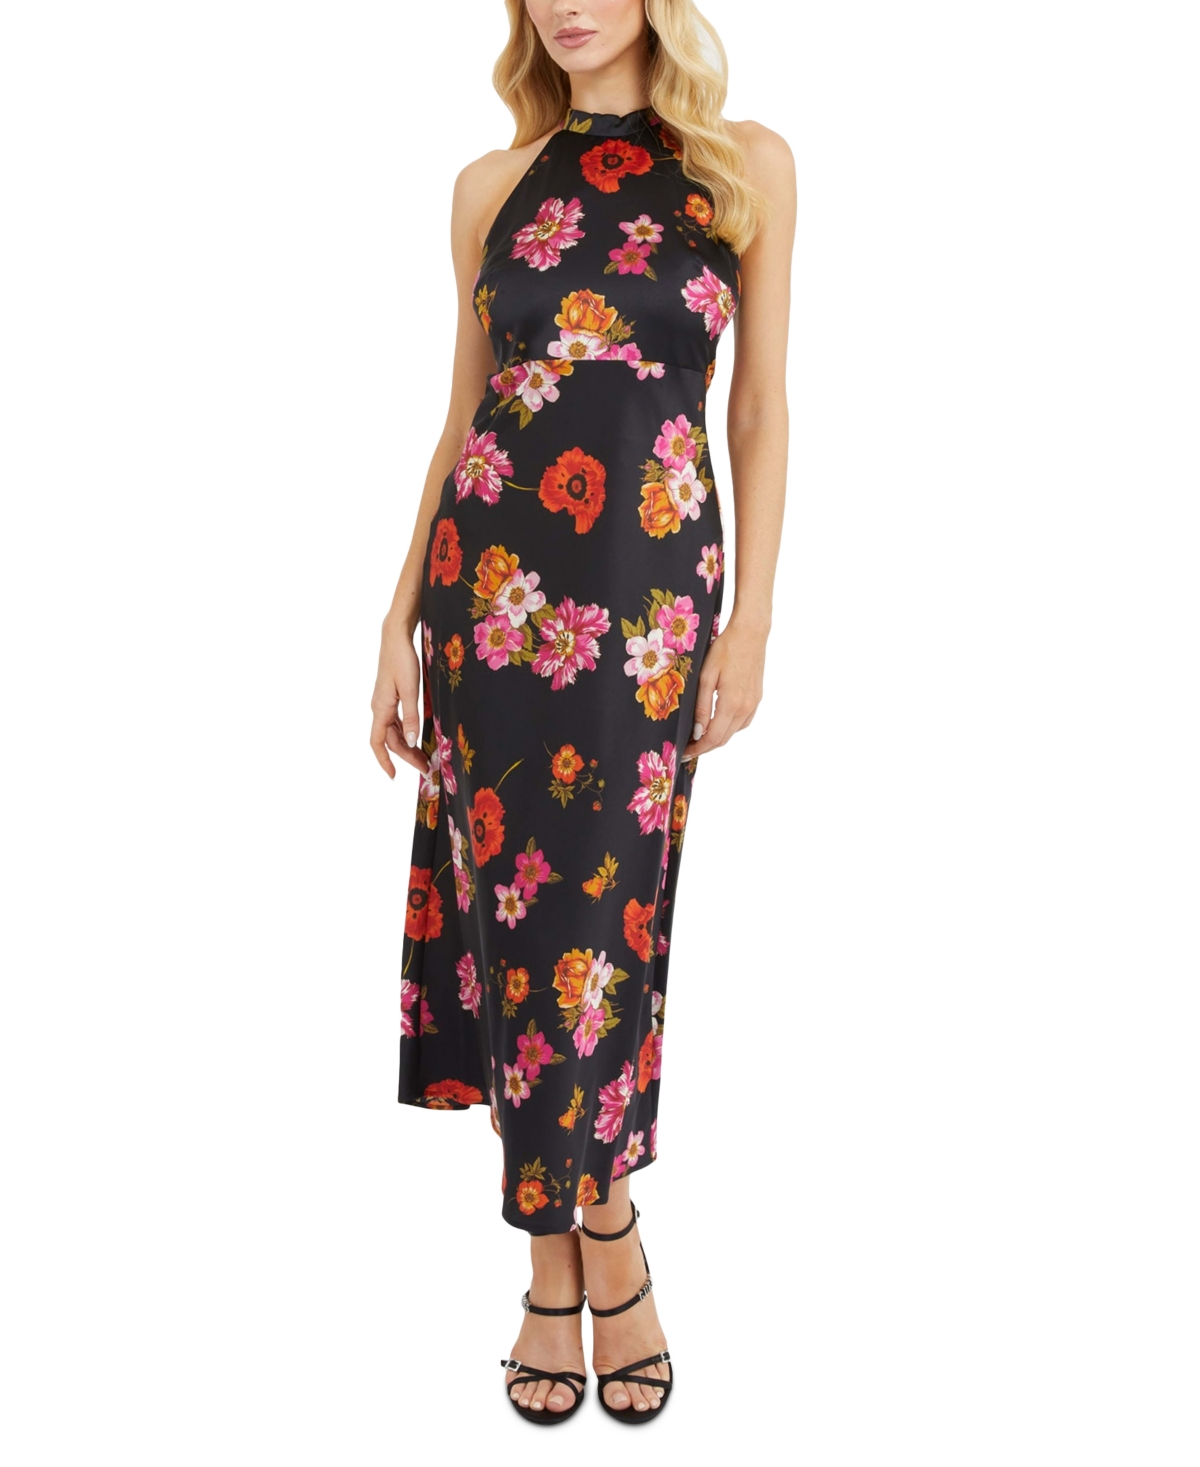 Guess Women's Diana Floral-print Sleeveless Dress In Floral Black Ground